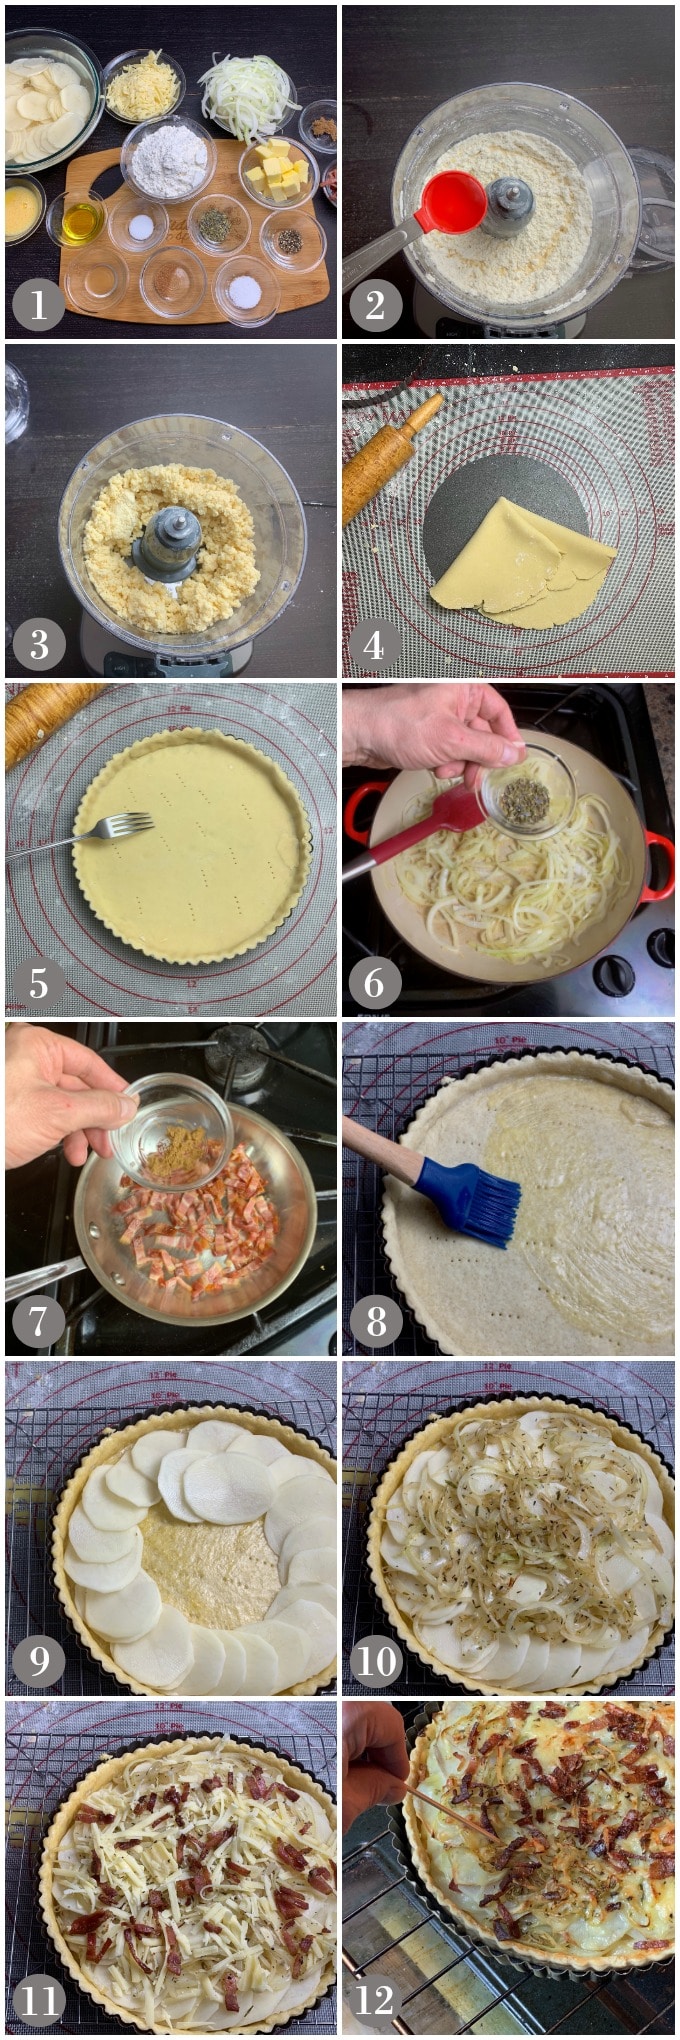 A collage of photos showing how to make potato, bacon and gruyere tart baked in the oven.